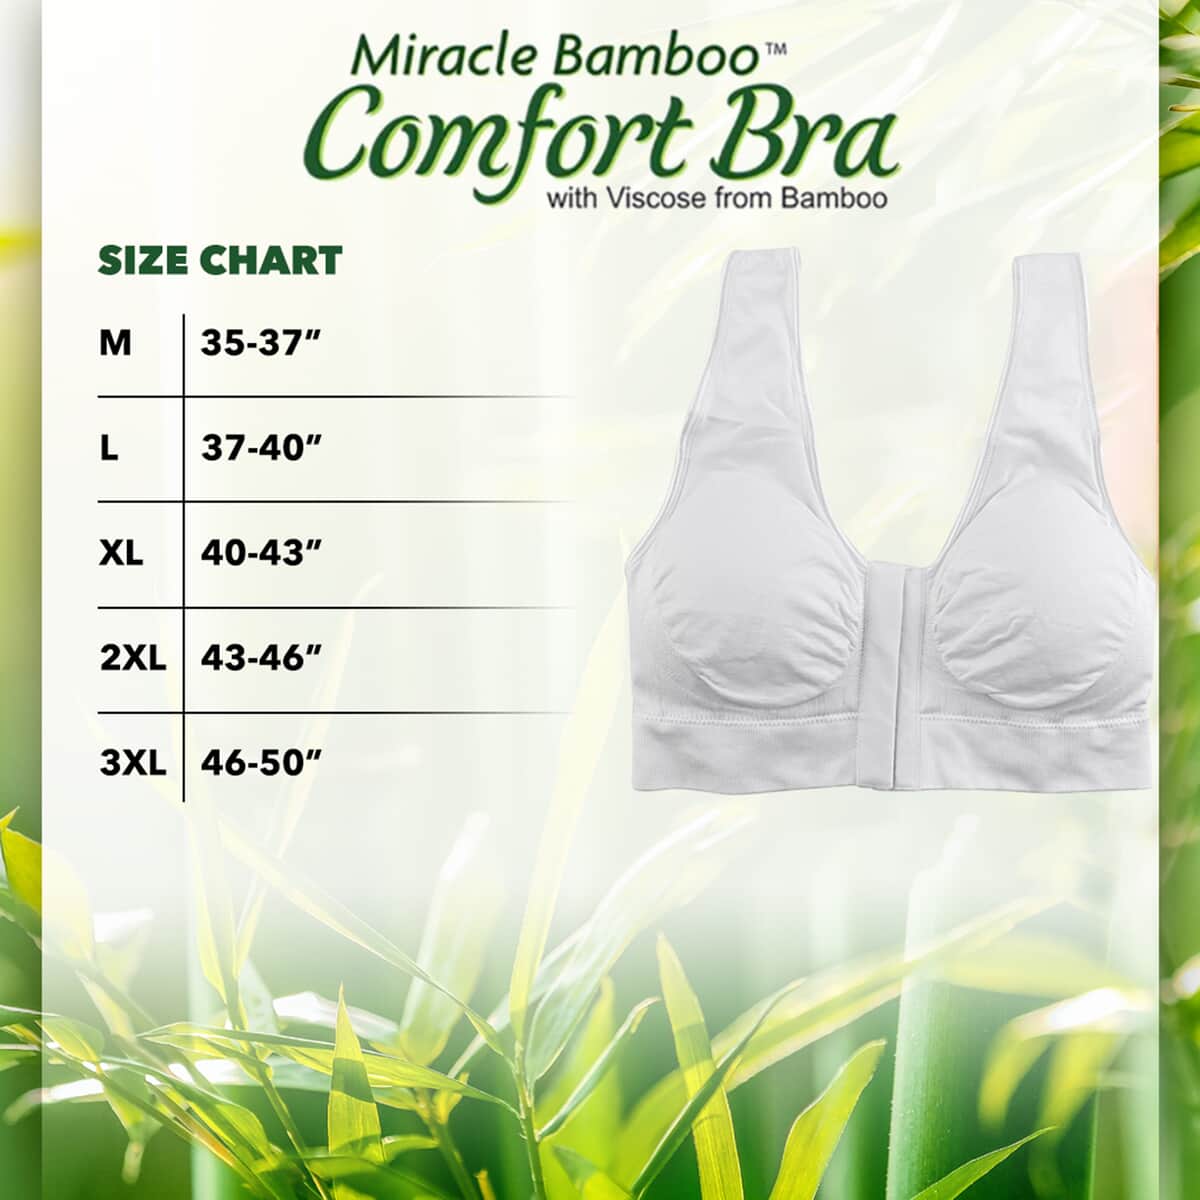 Miracle Bamboo Beyond Comfort Bra Set of 3 Front Closure Bras - Black, Beige and White - Size L image number 3